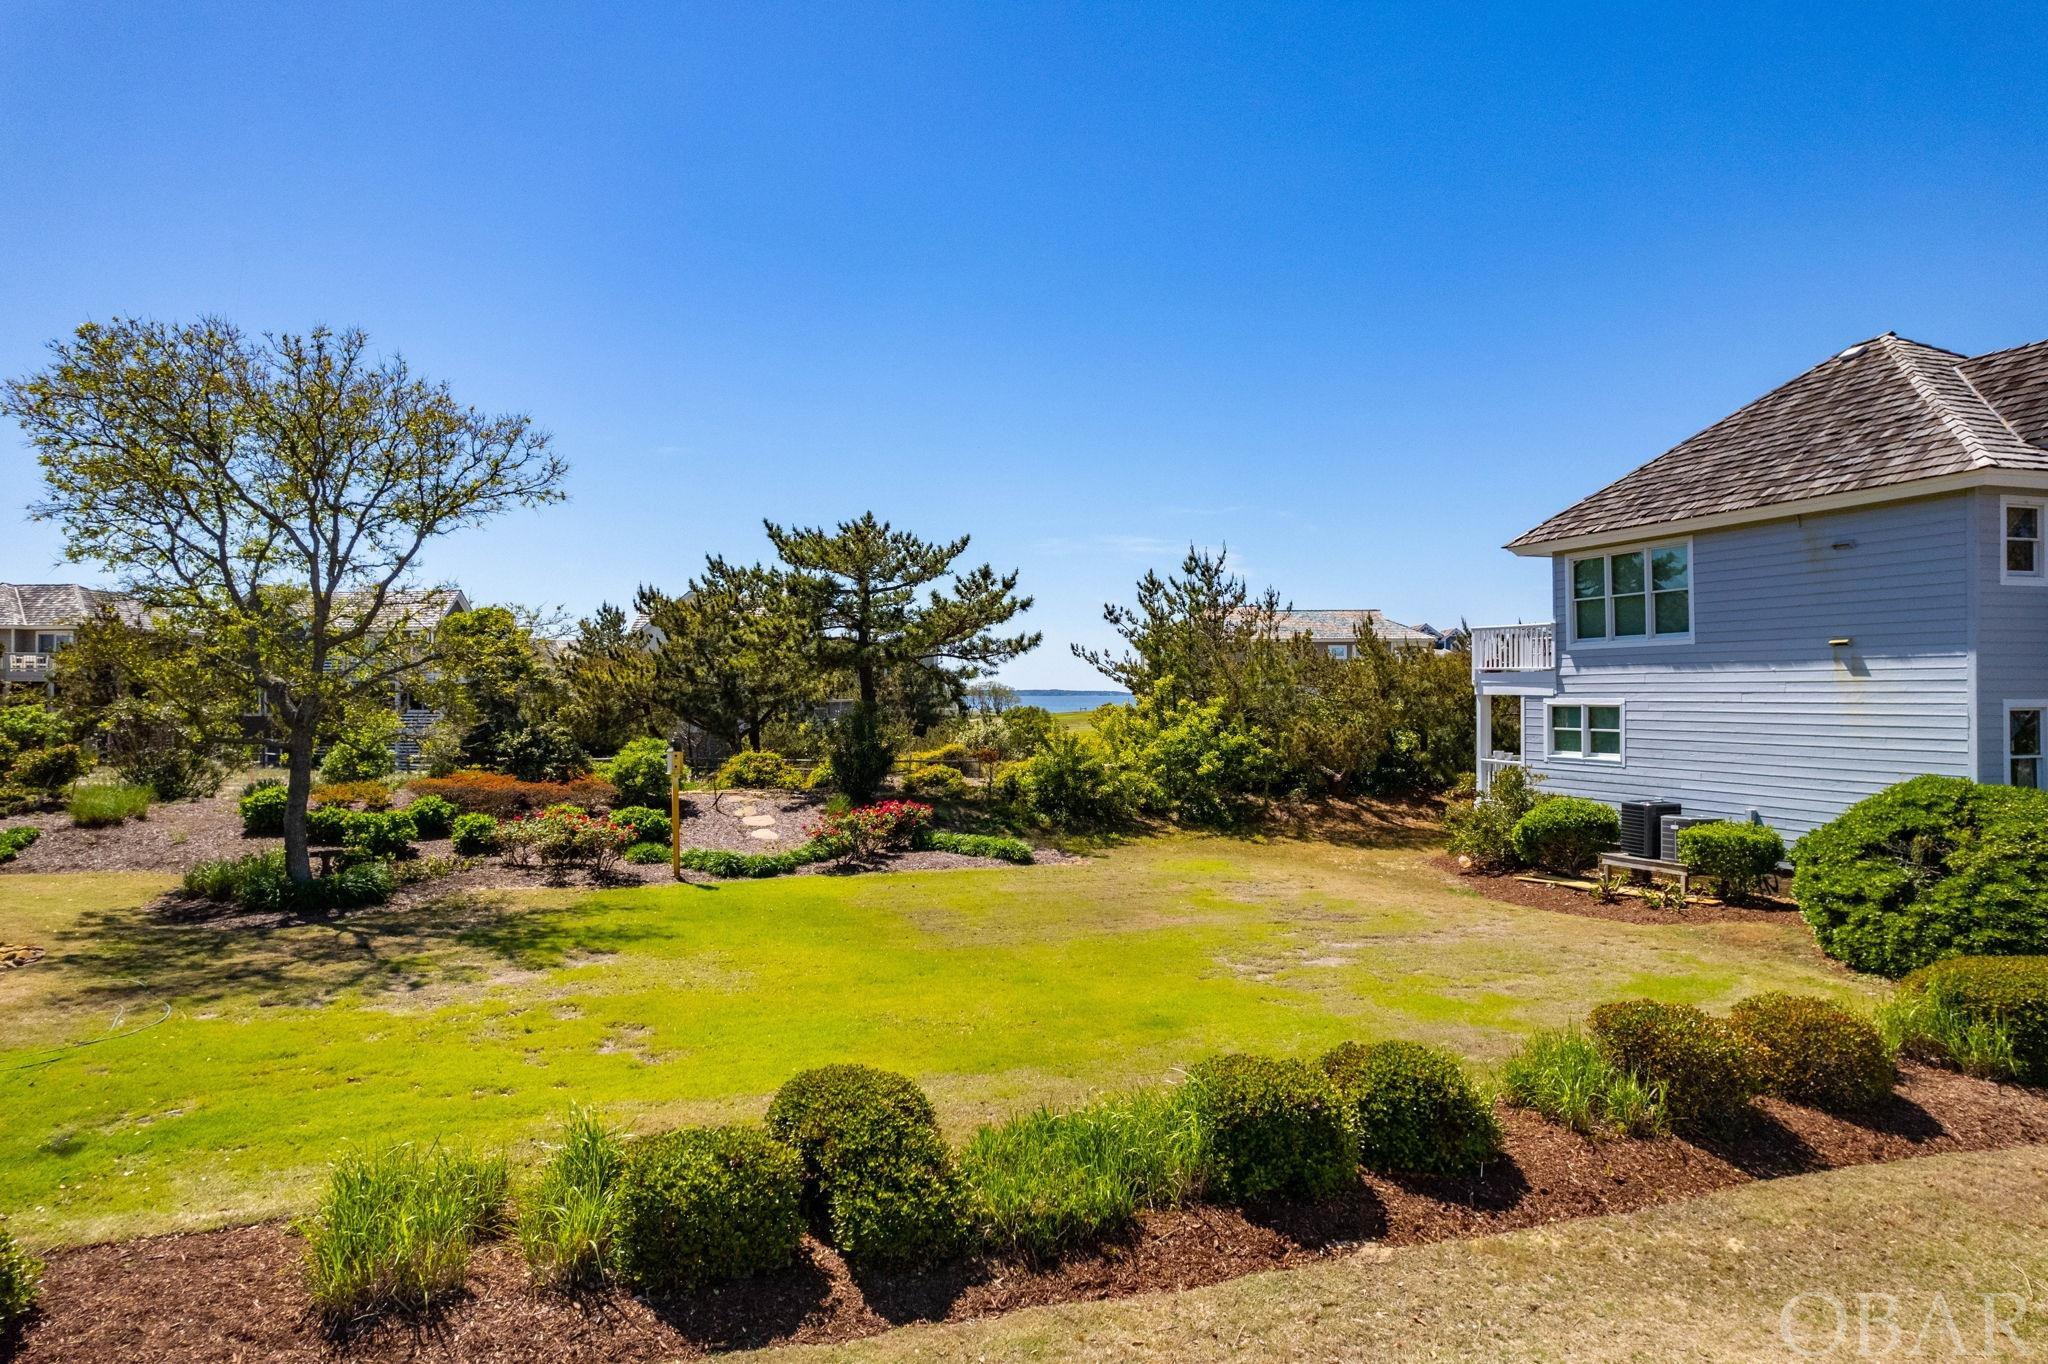 5304 Captains Way, Nags Head, NC 27959, ,Lots/land,For sale,Captains Way,125406